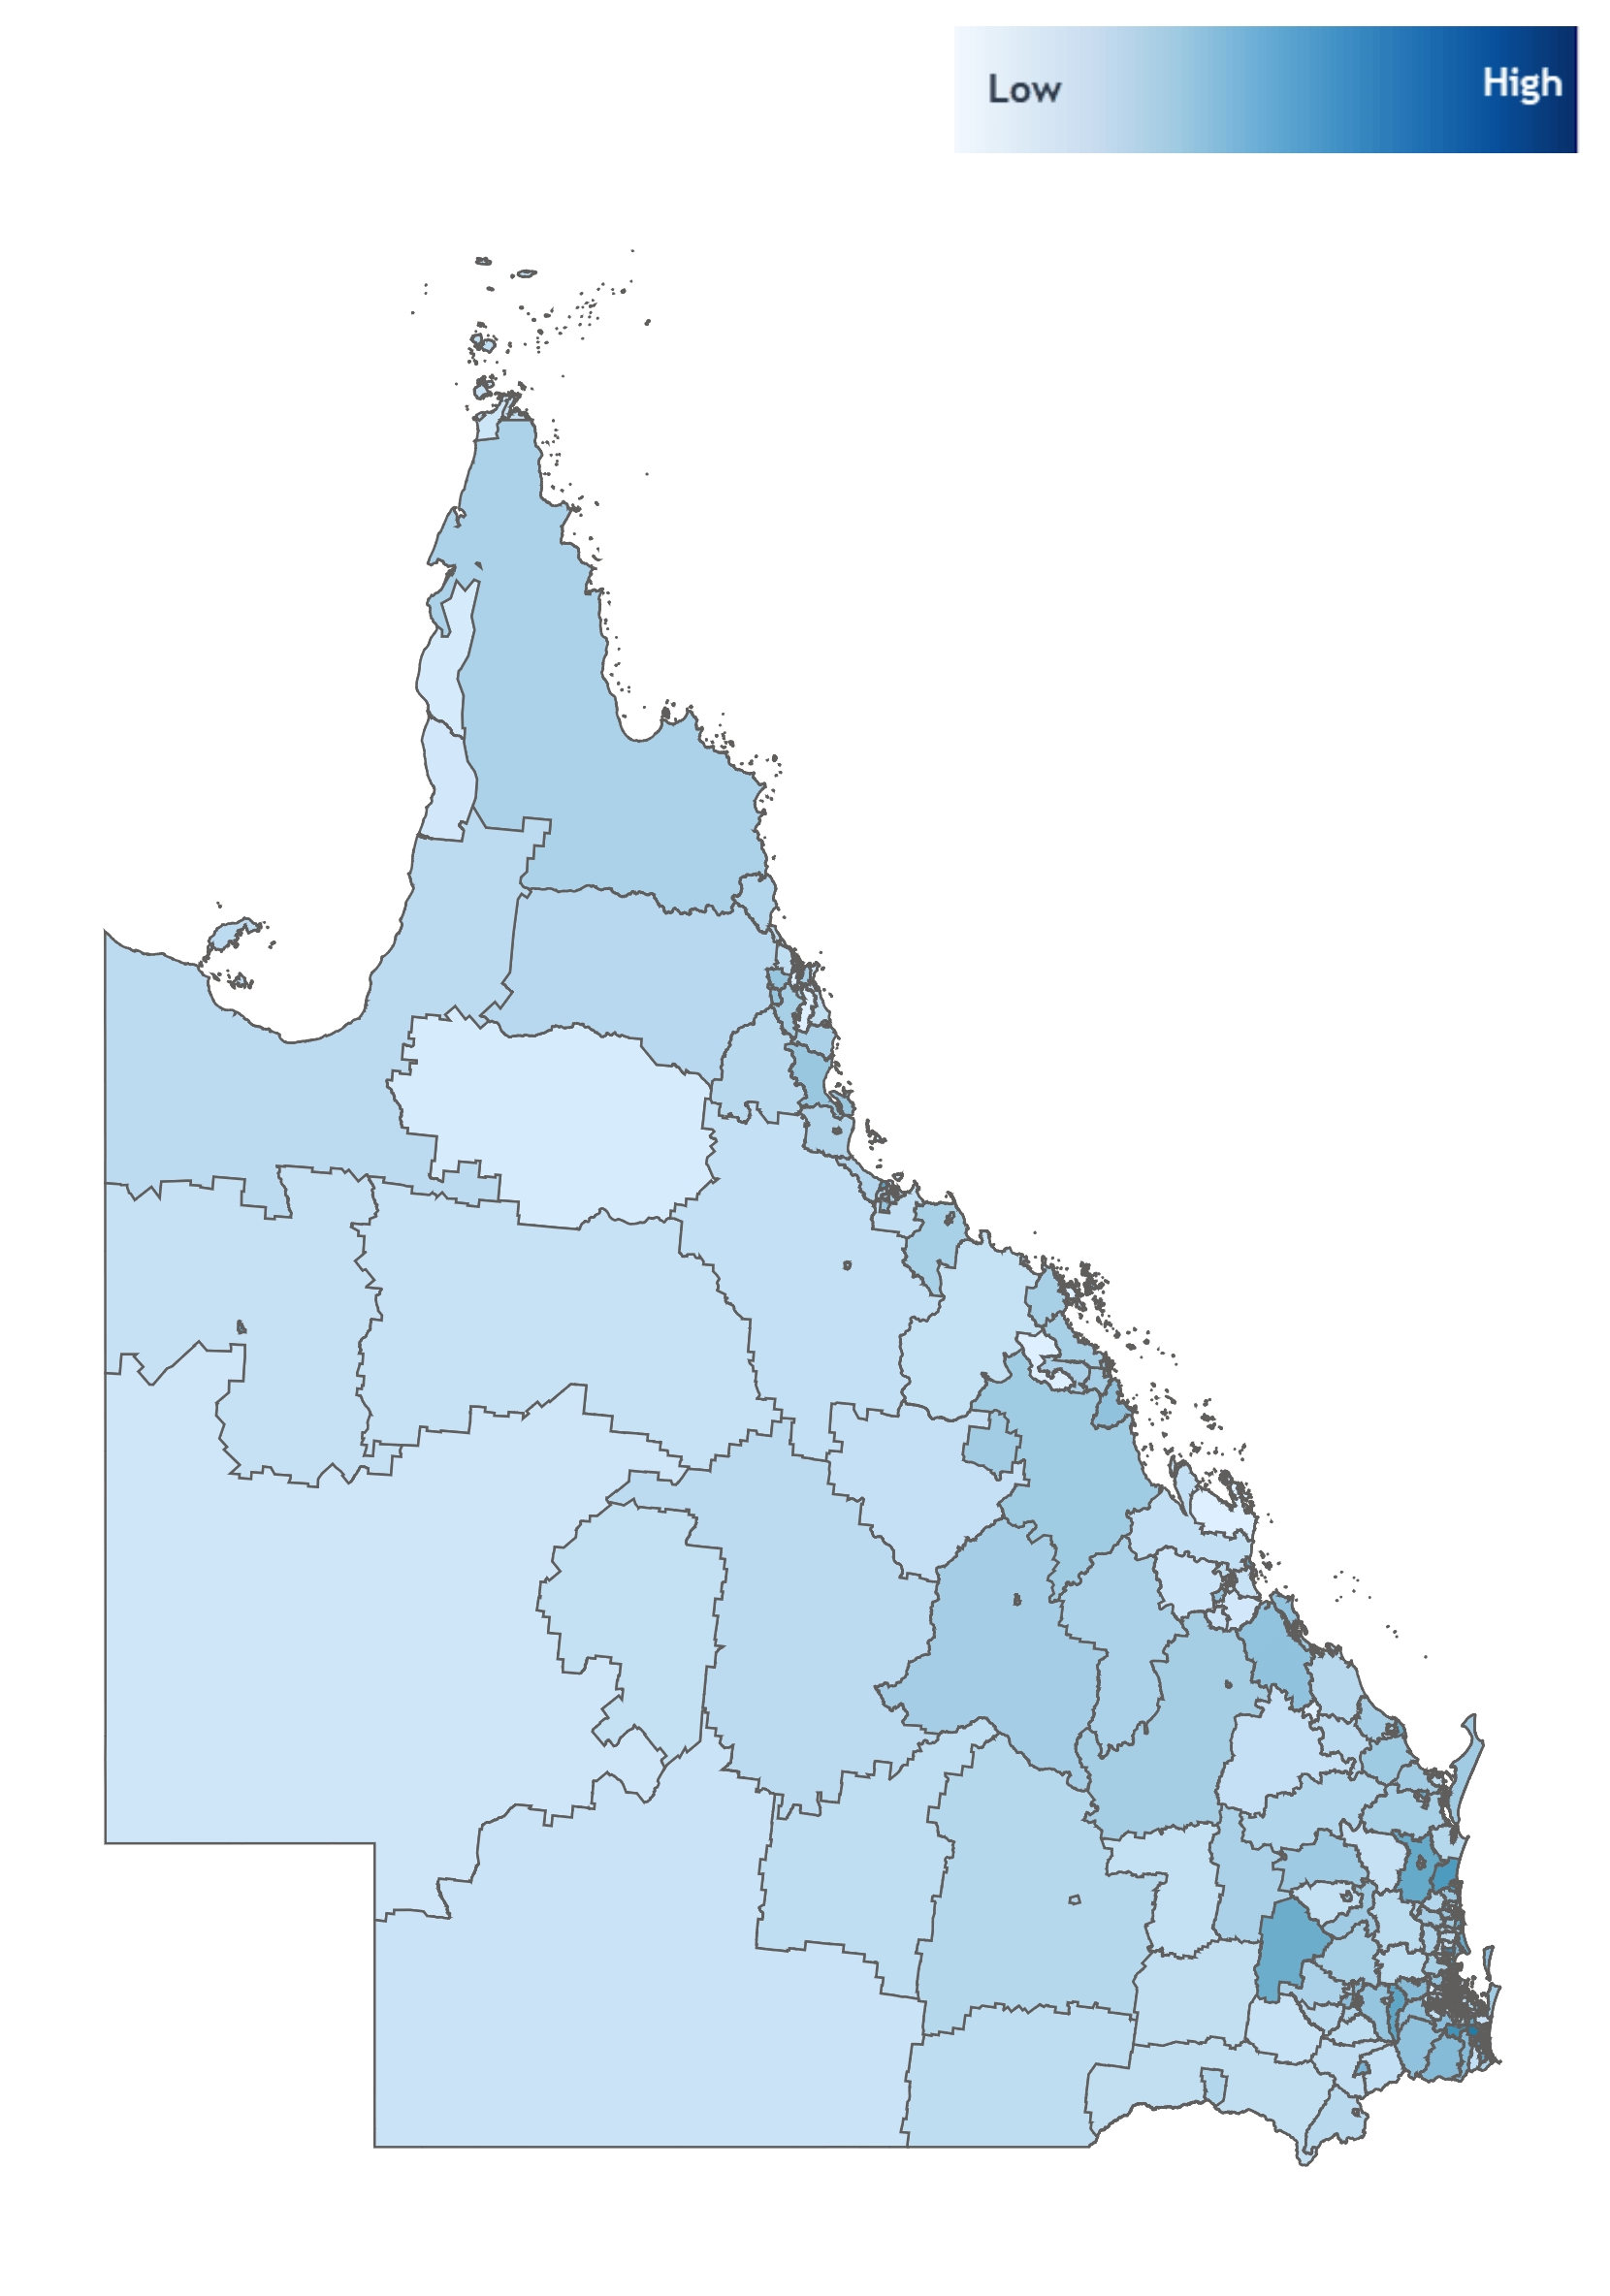 Heatmap of queensland showing population density by SA2 geographical boundaries